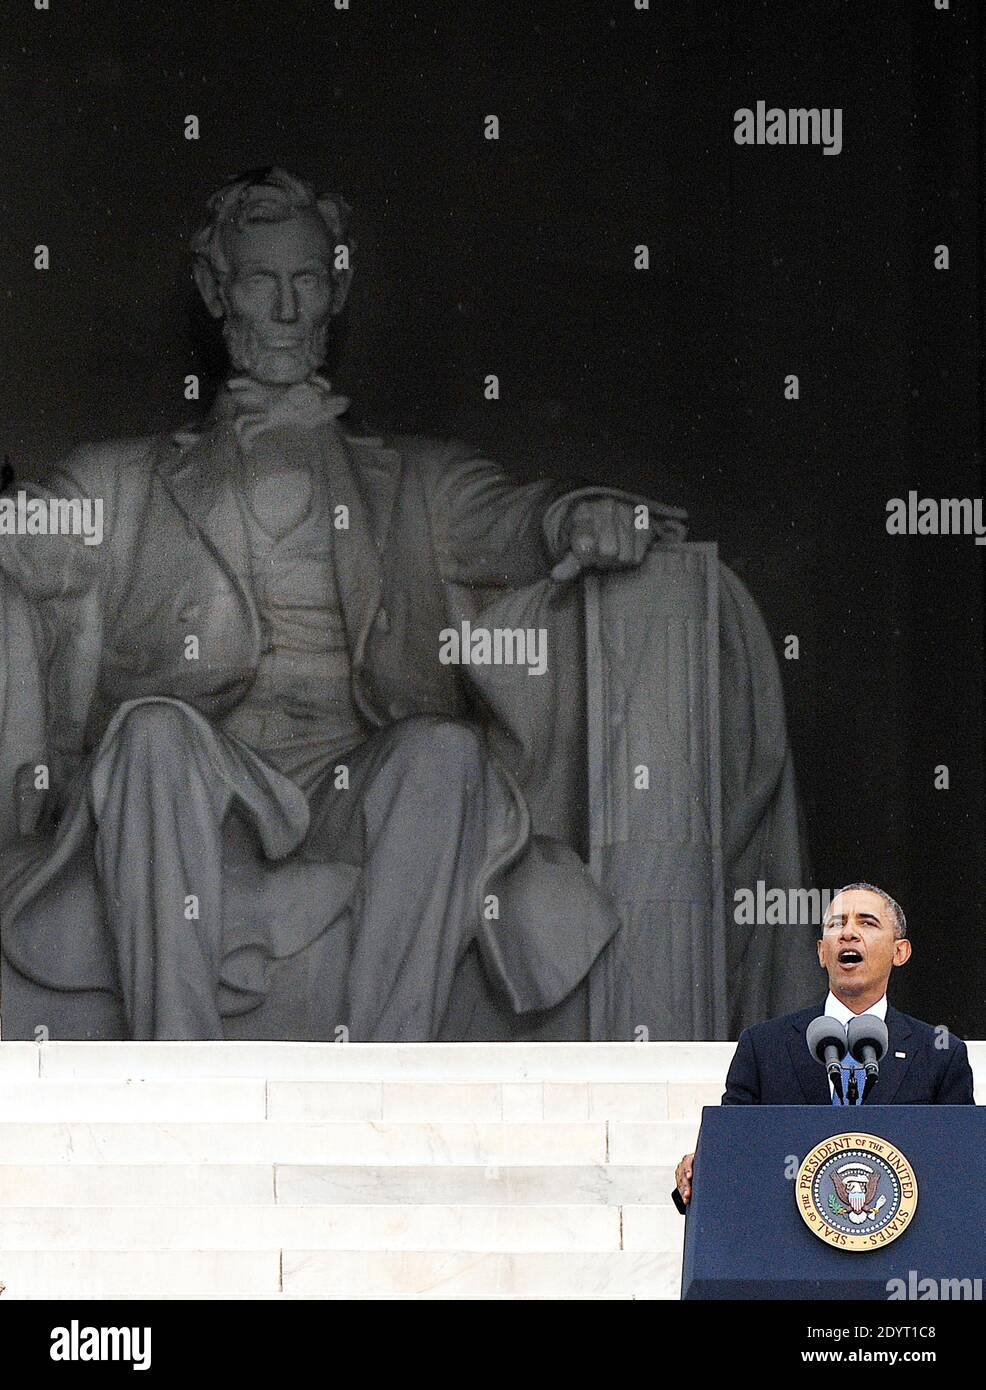 President Barack Obama delivers remarks at the "Let Freedom Ring "ceremony to commemorate the 50th anniversary of the March on Washington for Jobs and Freedom at the Lincoln Memorial on the National Mall in Washington, DC, USA, on August 28, 2013. Photo by Olivier Douliery/ABACAPRESS.COM Stock Photo